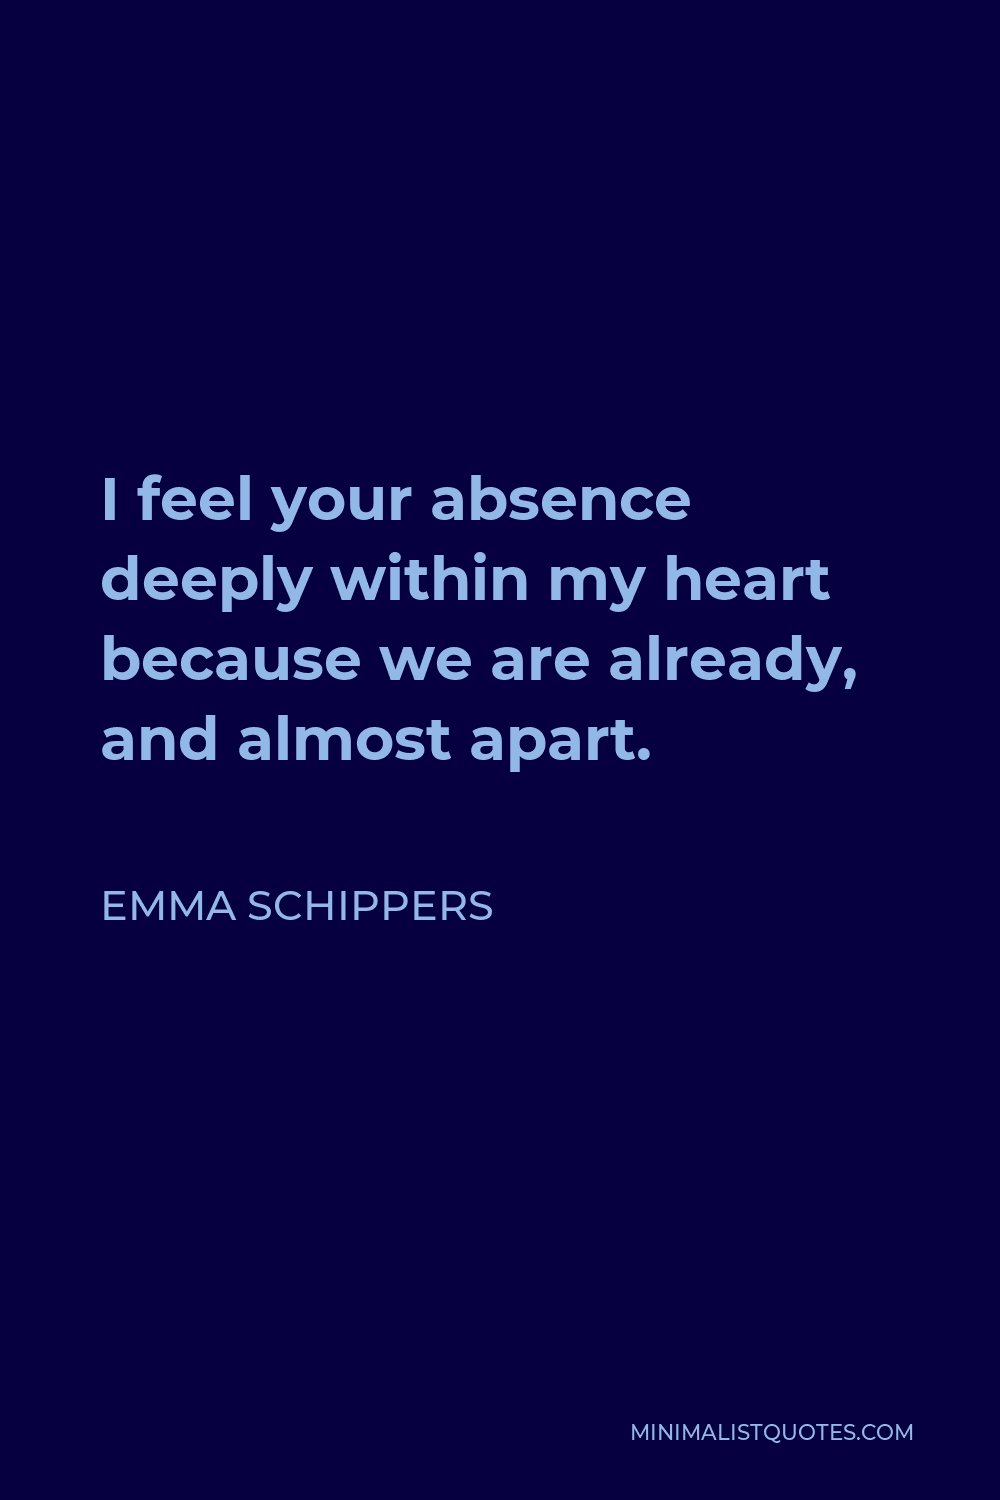 I FEEL YOUR ABSENCE QUOTES –